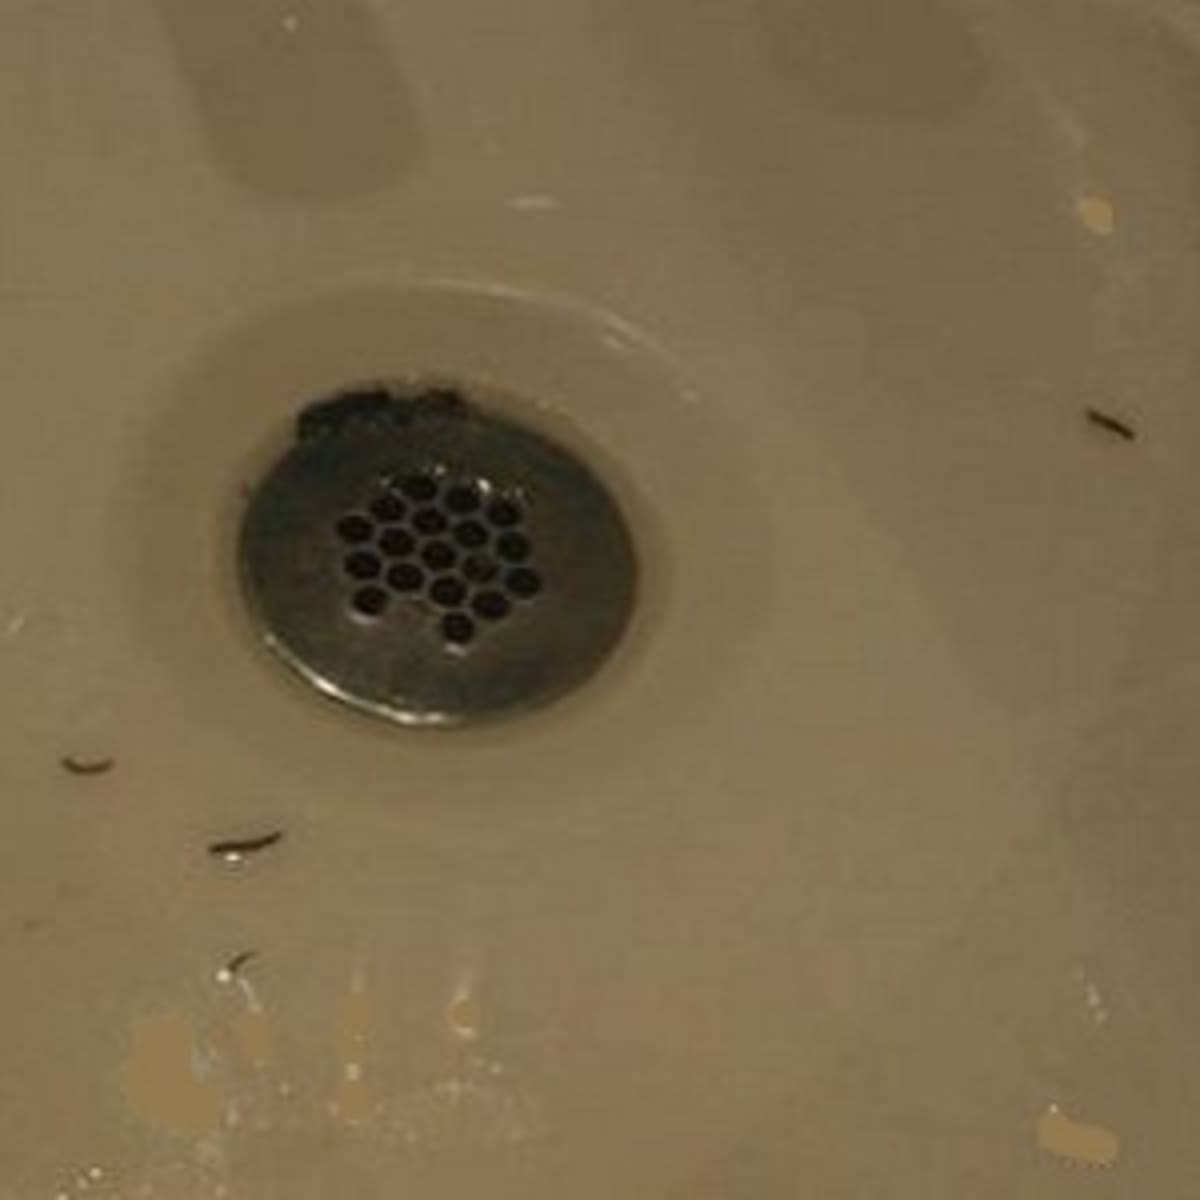 How to Get Rid of Worms in the Toilet?